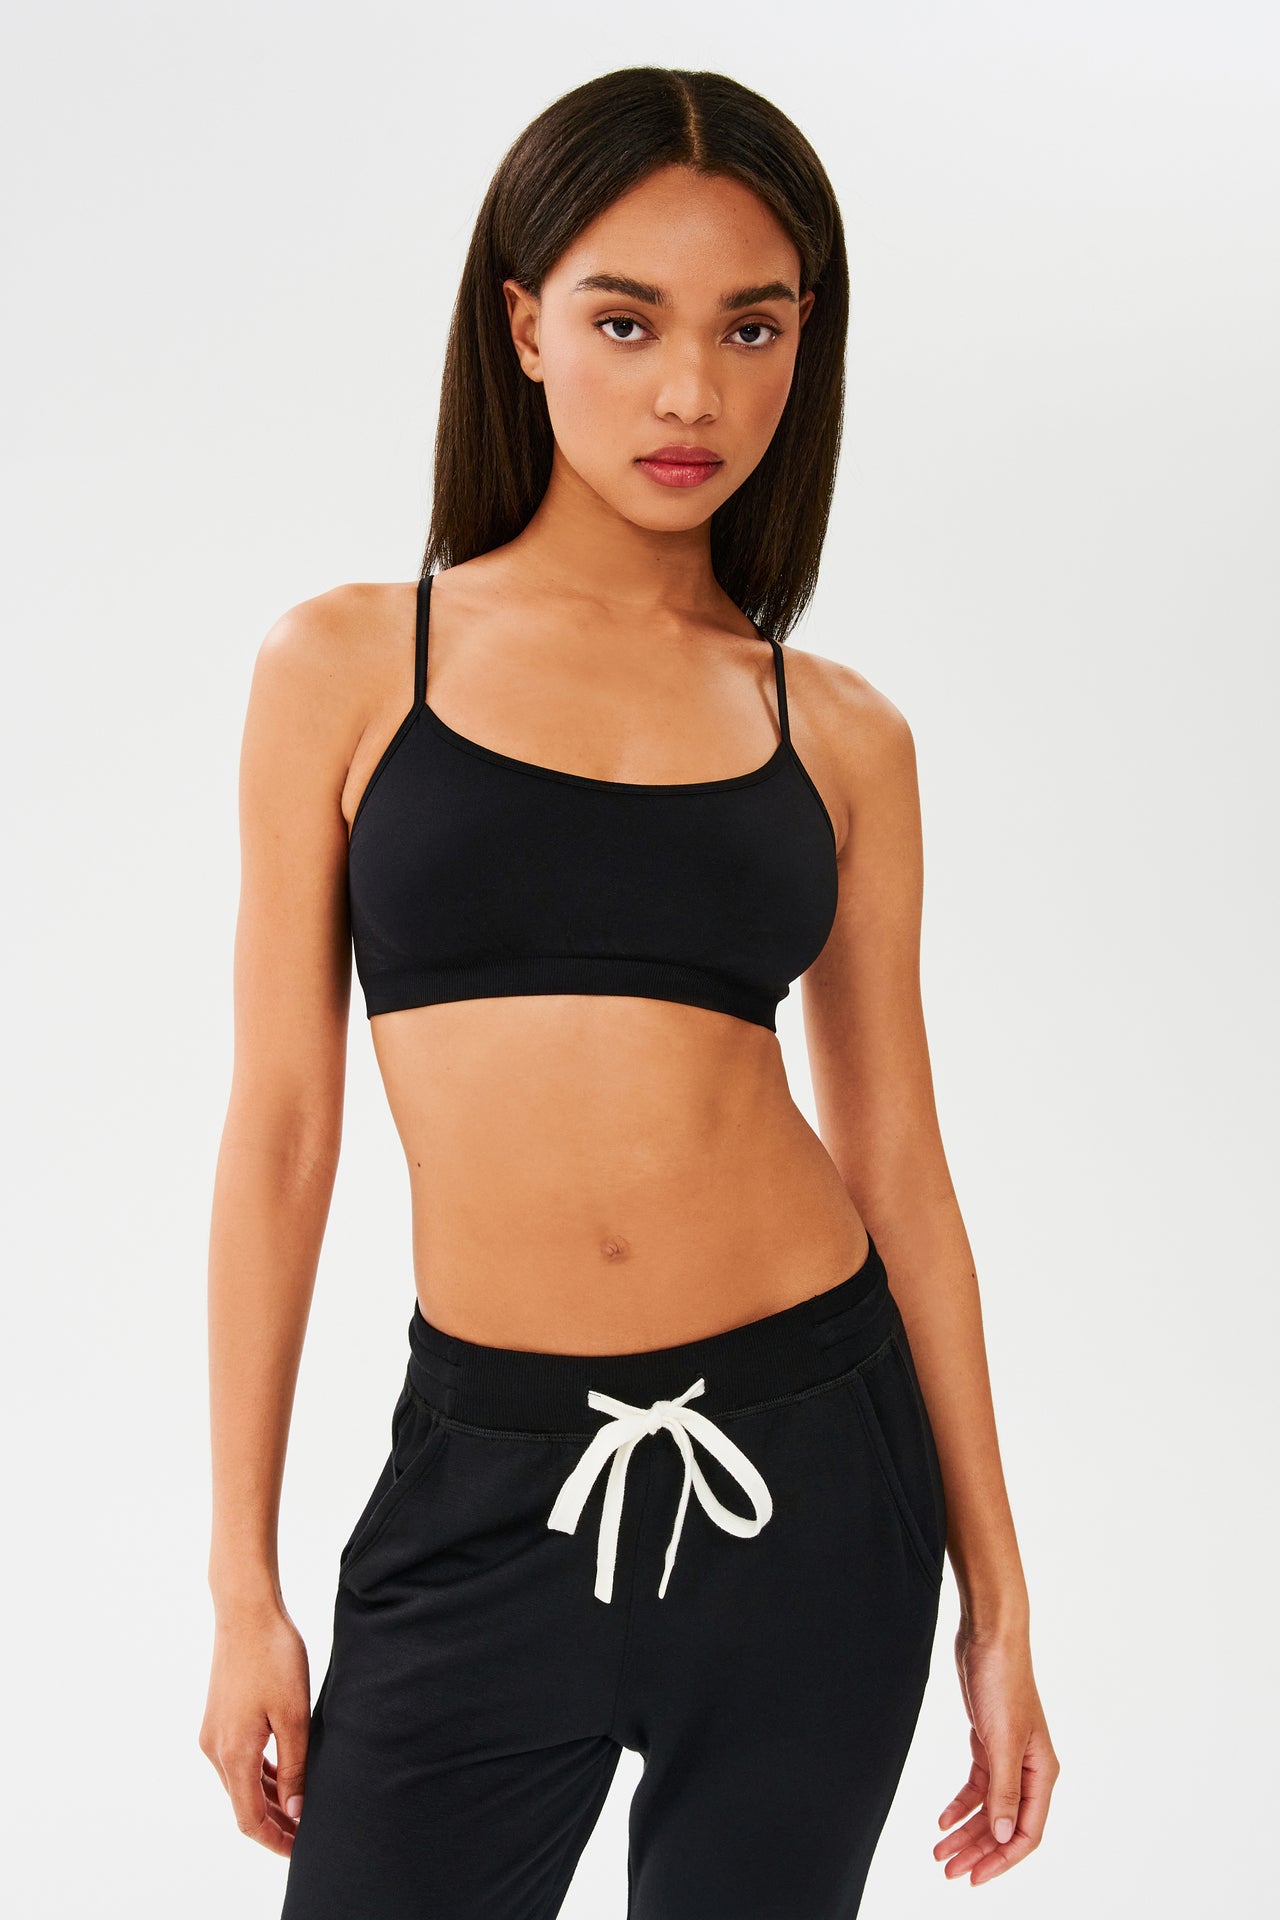 The model is wearing a Splits59 Loren Seamless Bra in Black and sweatpants, designed with chafe-free fabric.